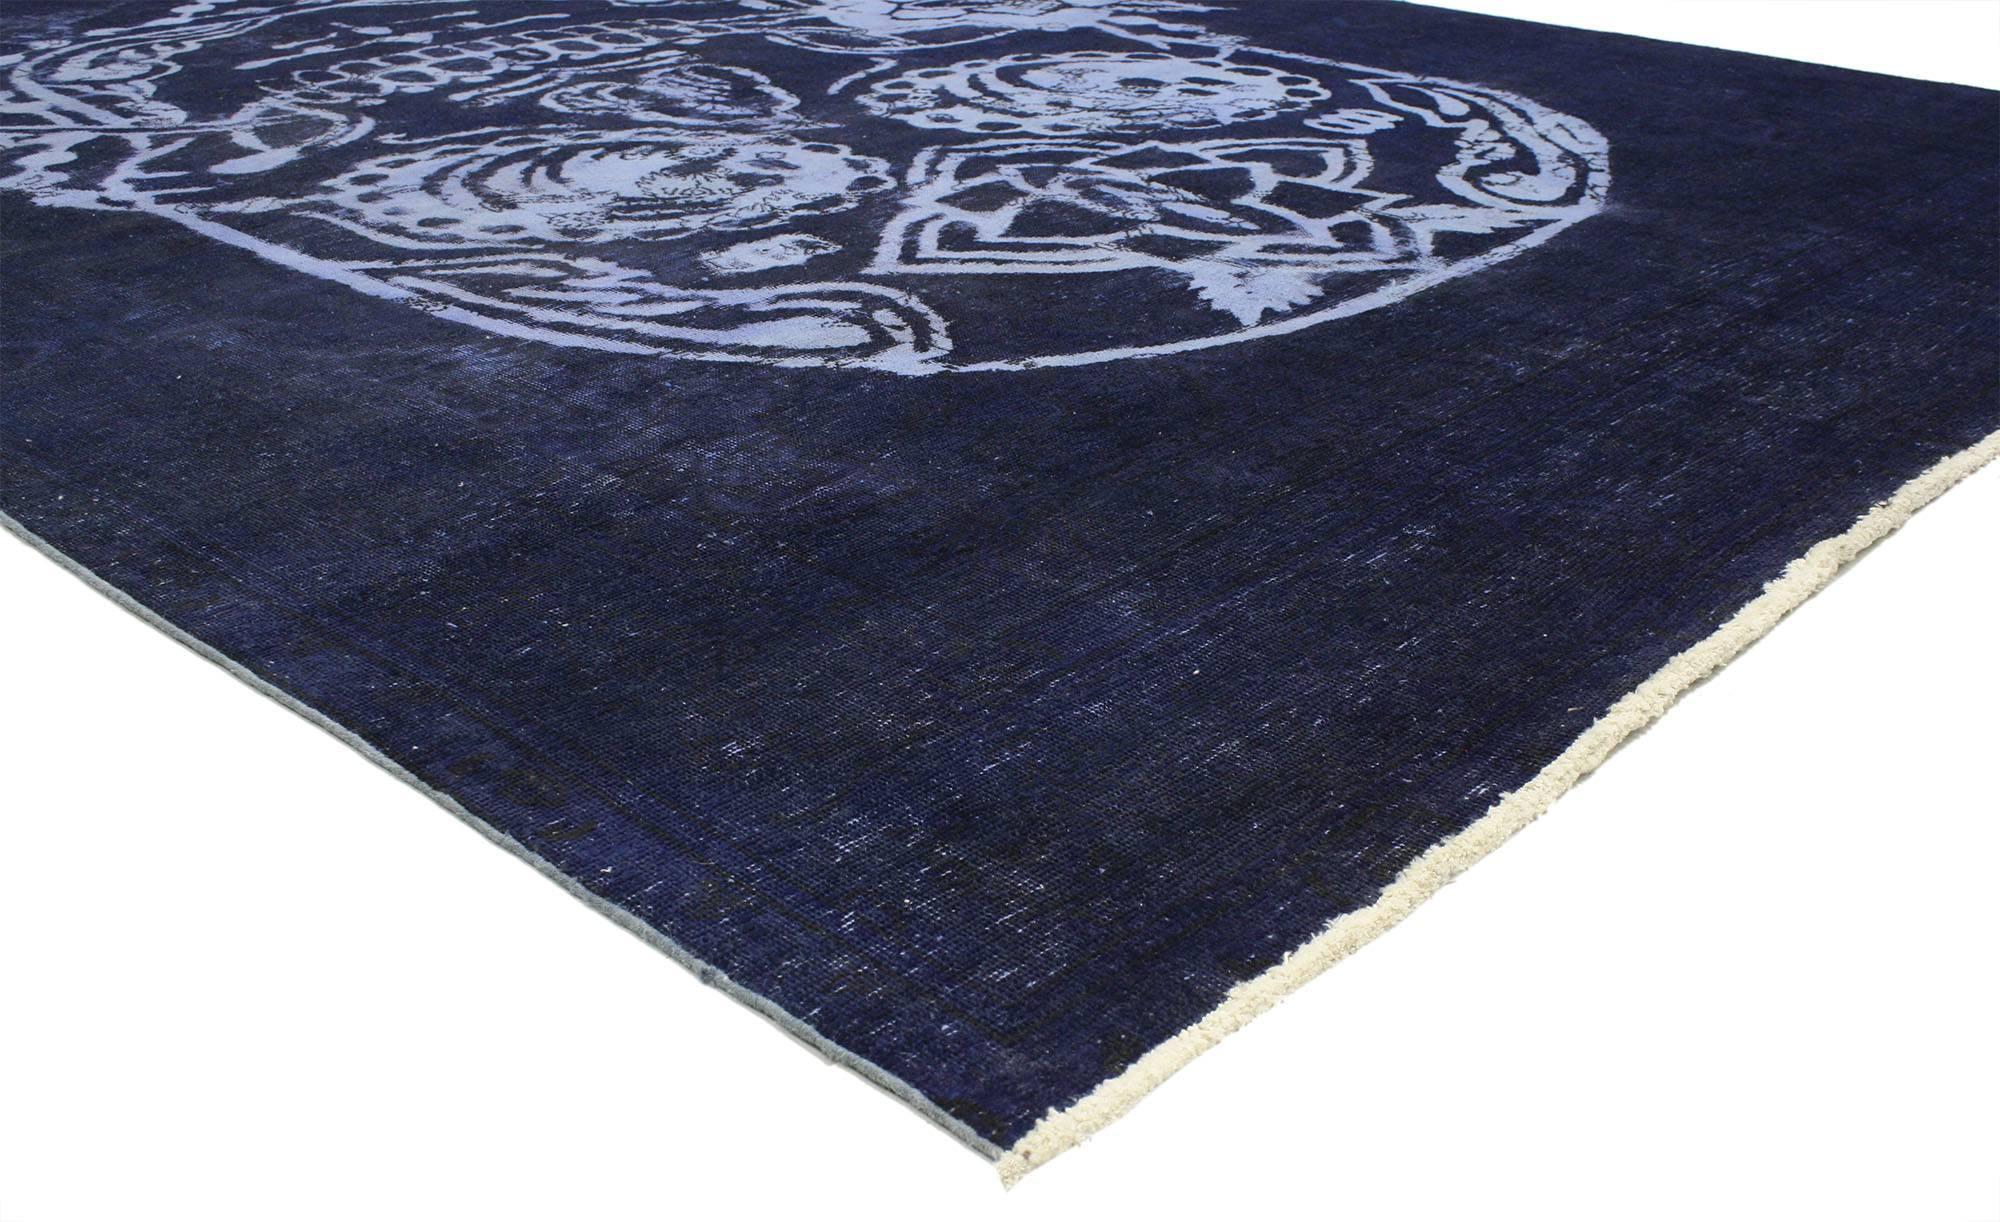 80433, Distressed Vintage Overdyed Blue Skull Rug 08'01 x 11'06. Drawing inspiration from Alexander McQueen, Día de los Muertos, and Disney's Coco movie, this hand knotted wool distressed vintage Calavera skull area rug has been crafted from a